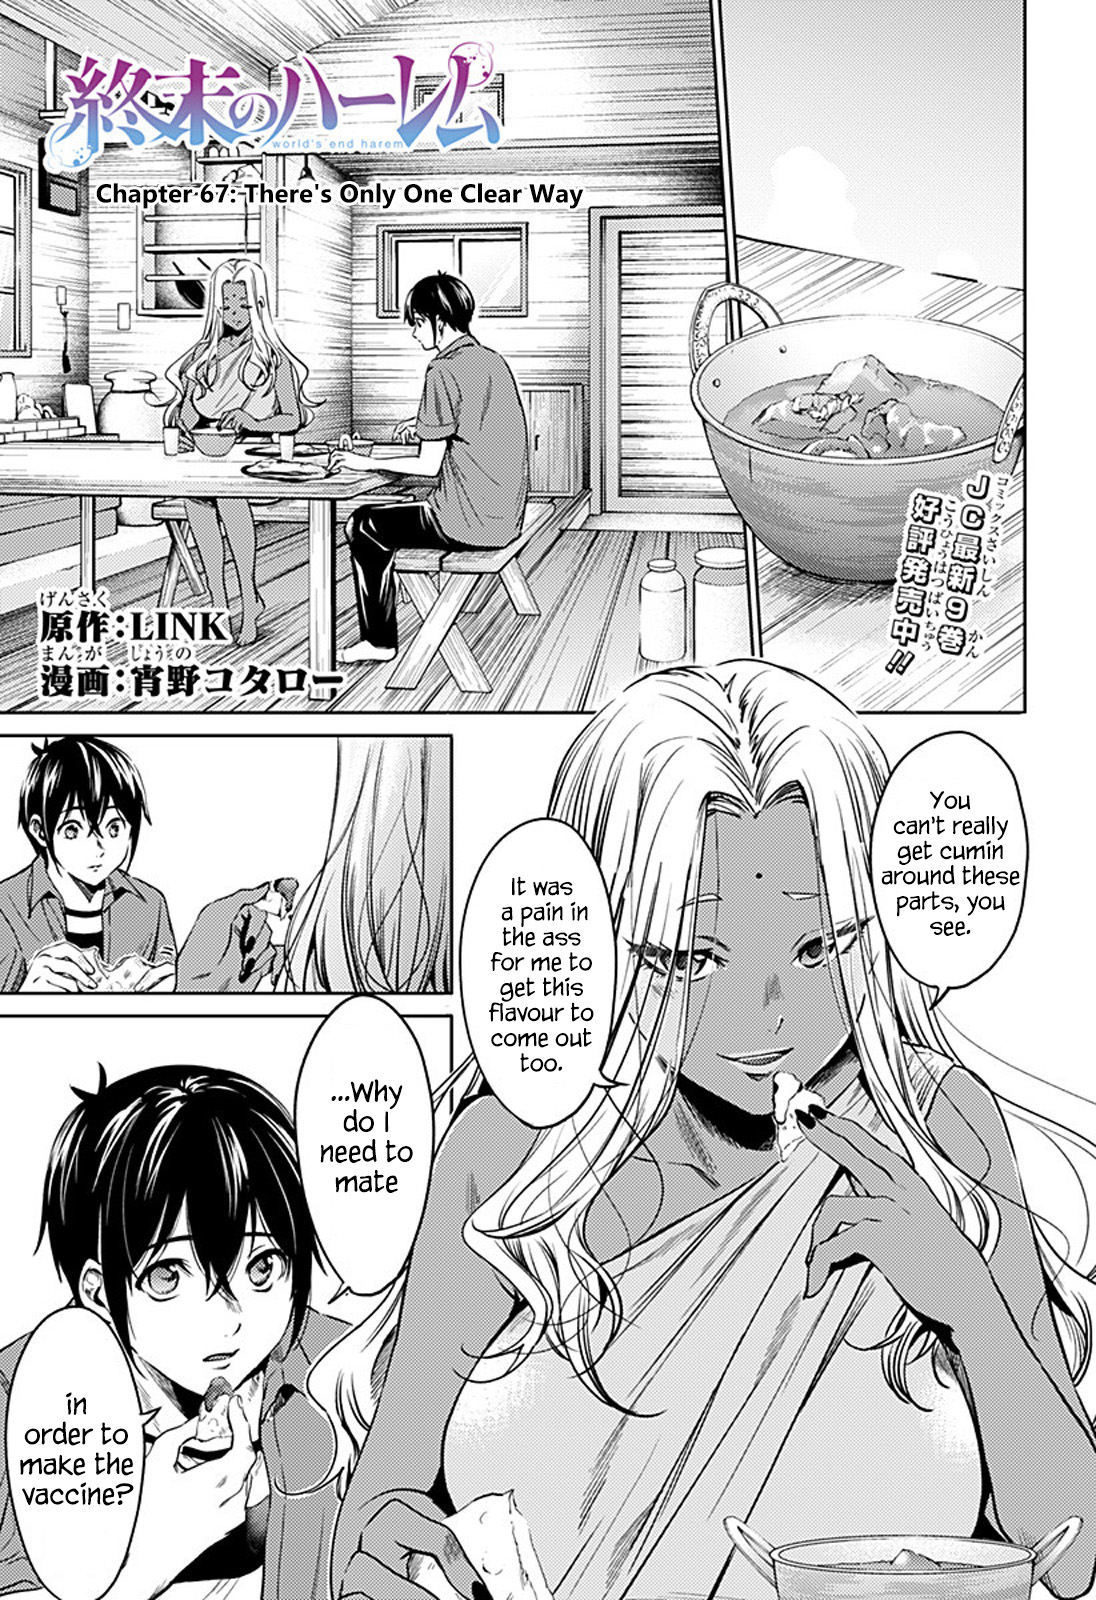 World's End Harem Ch. 67 There's Only One Clear Way